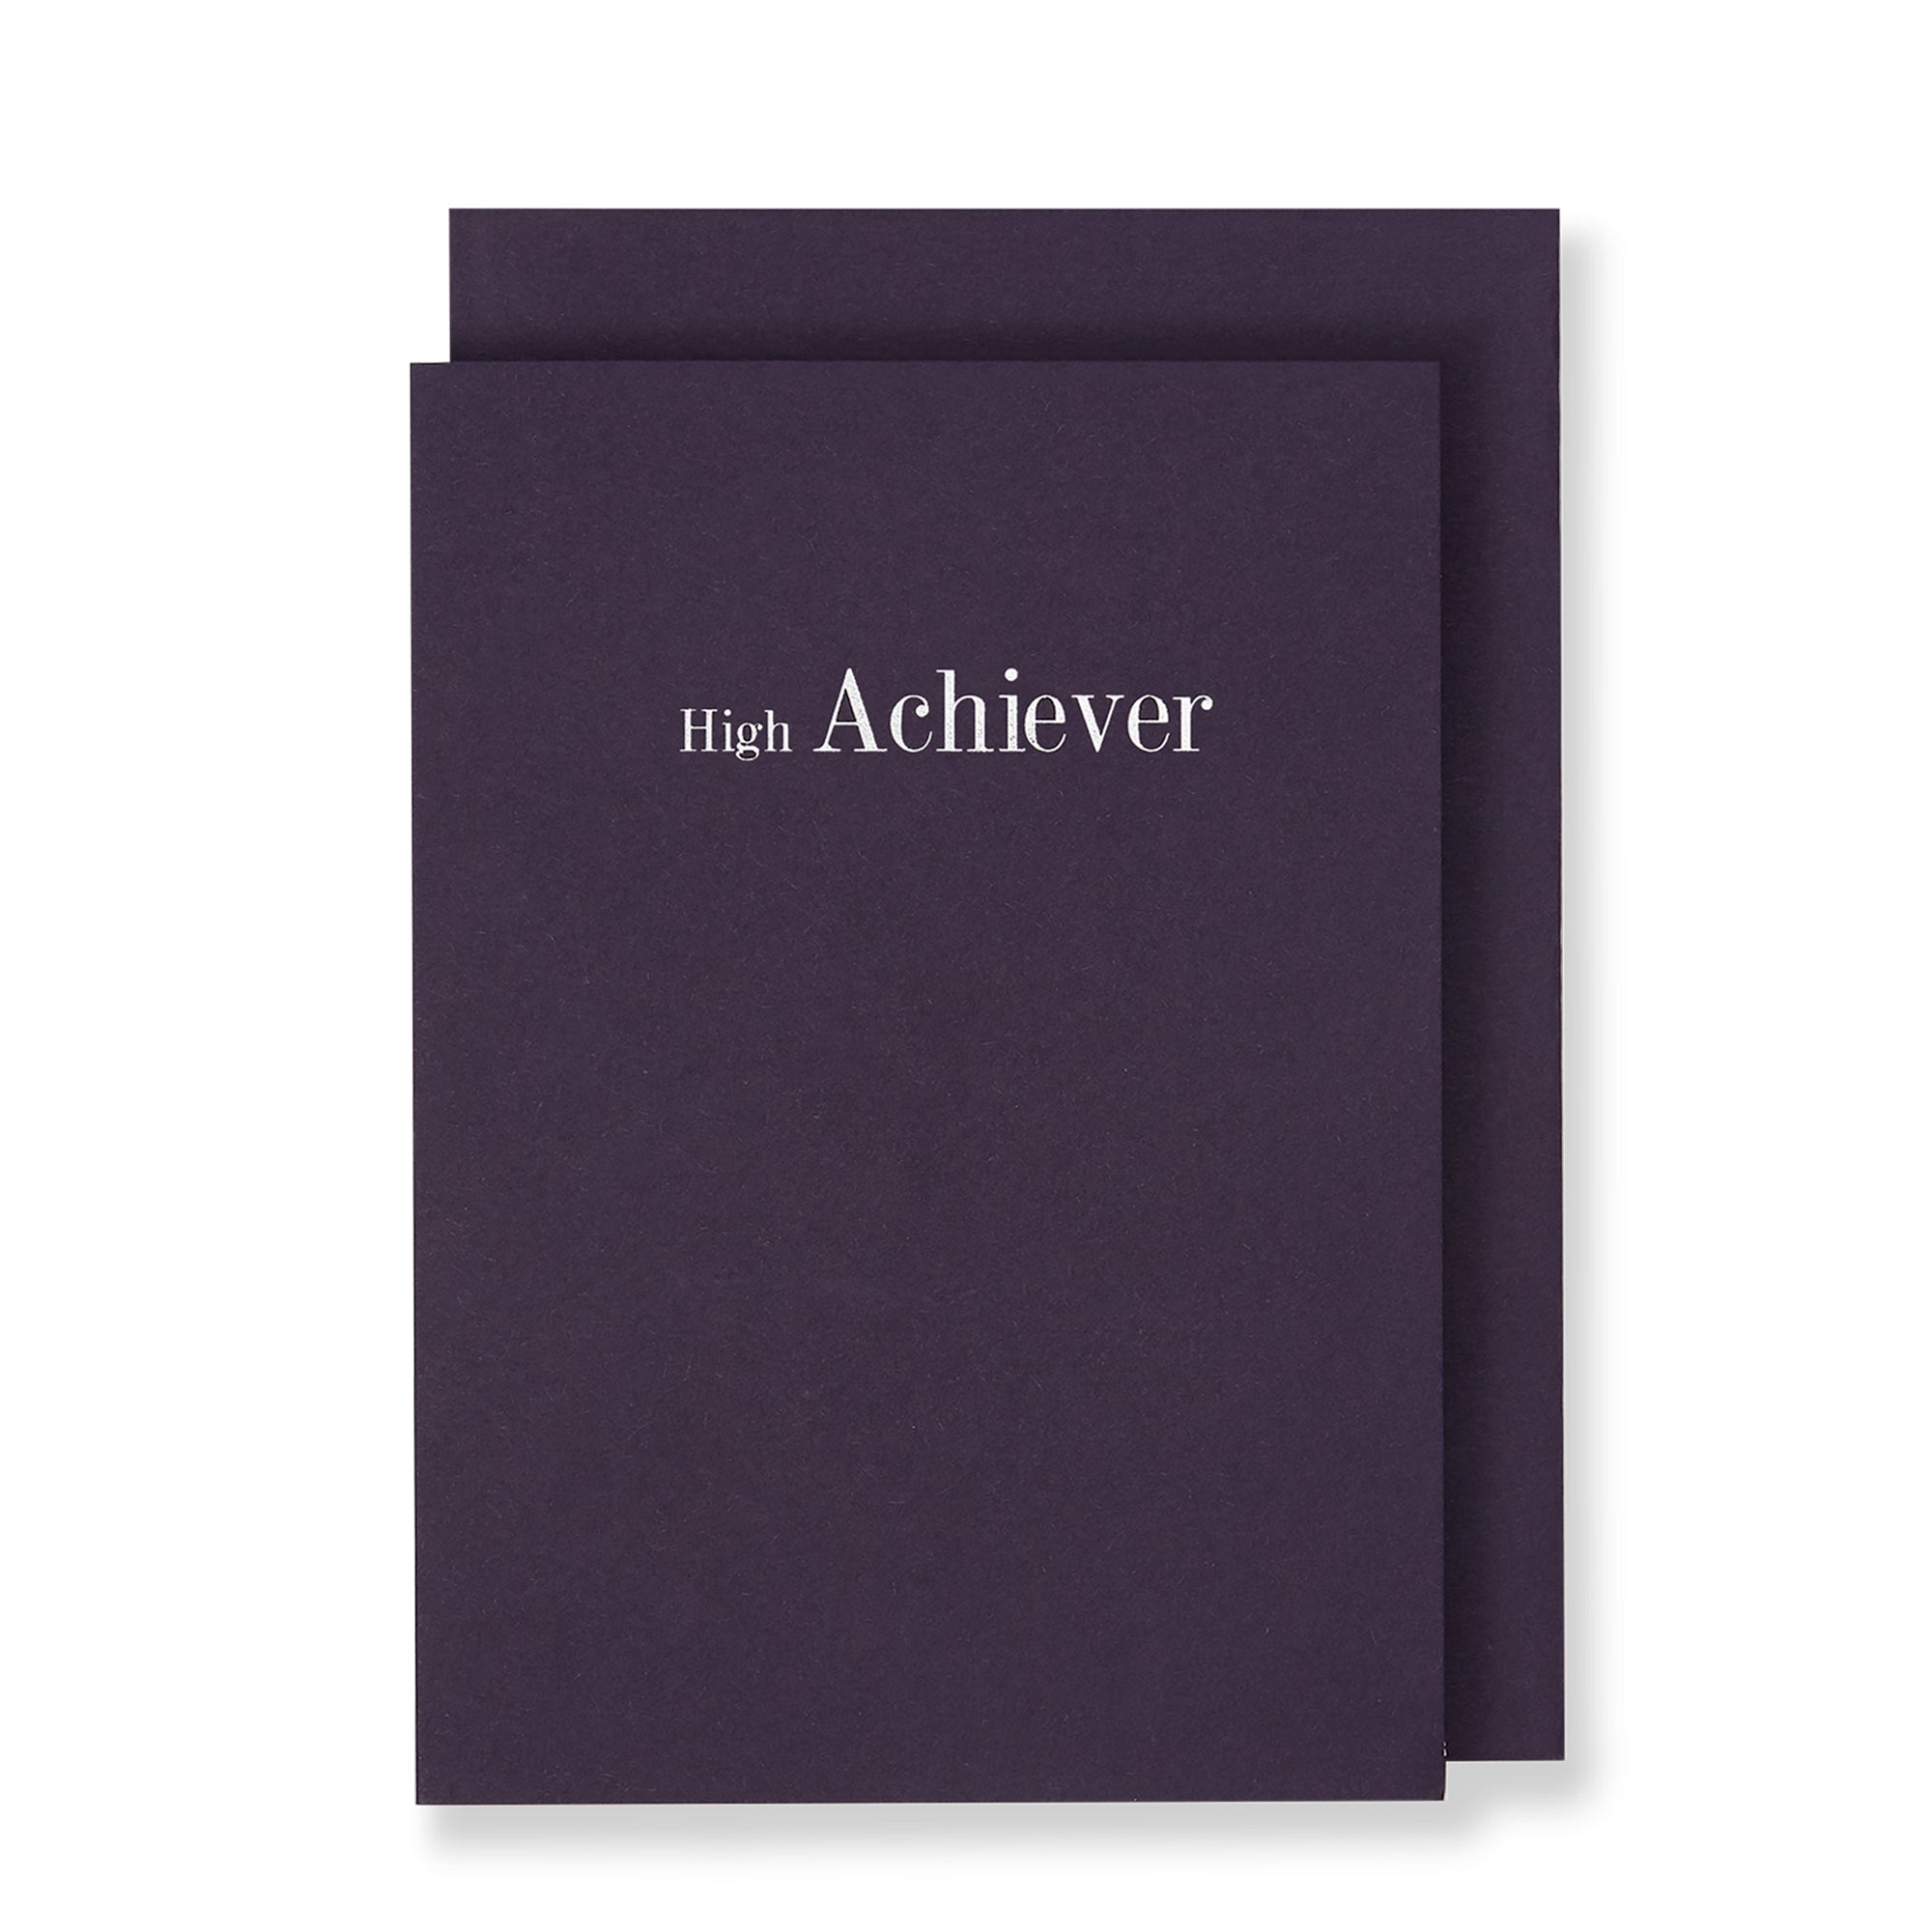 High Achiever Greeting Card in Deep Purple, Front